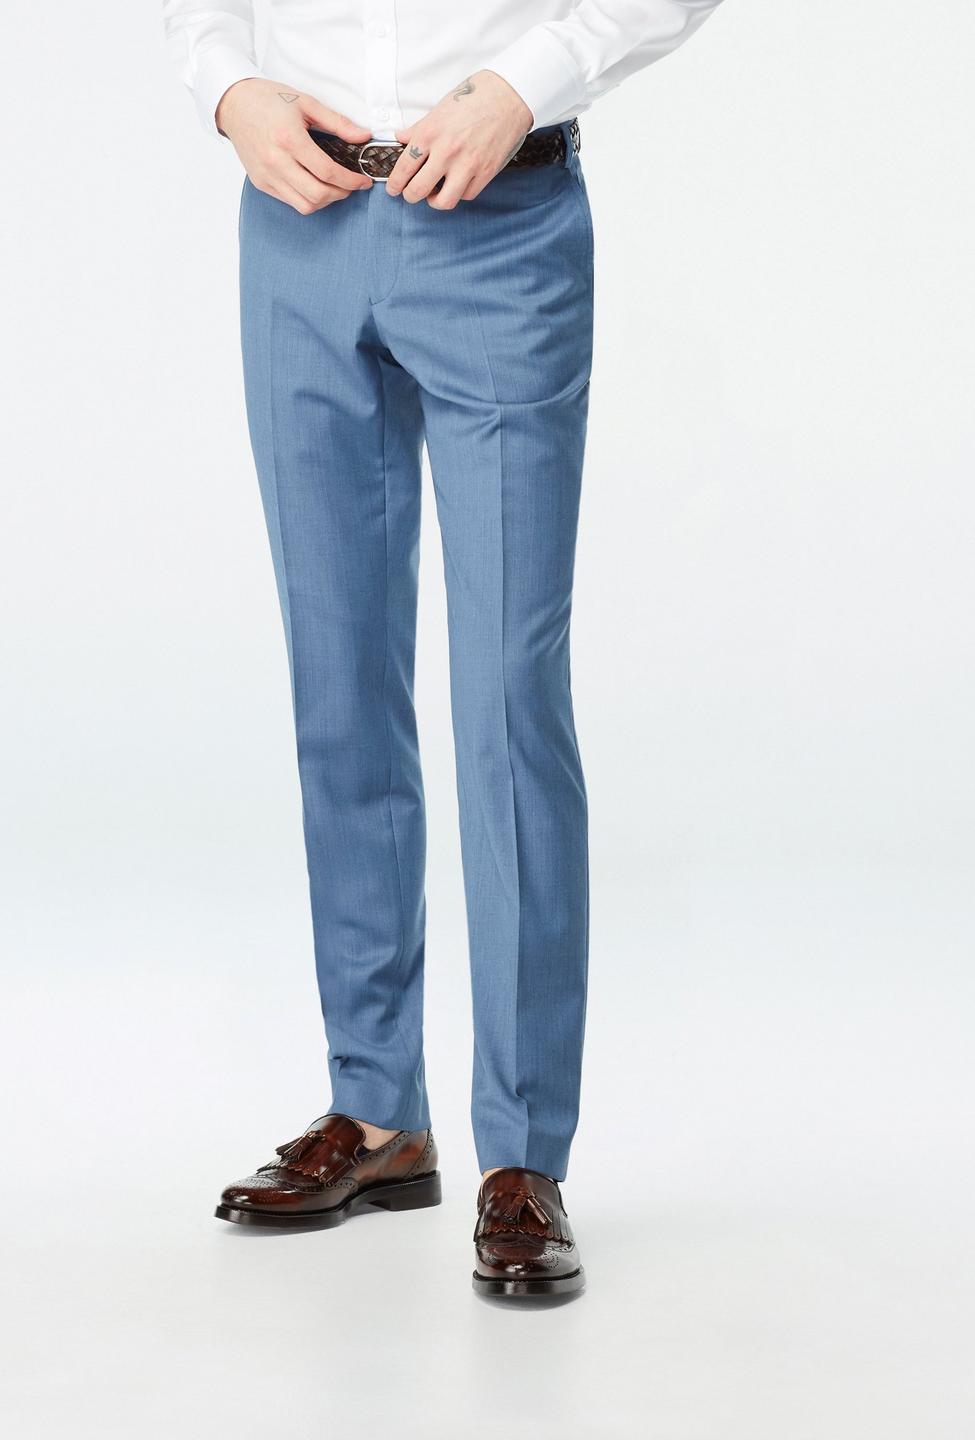 Cotton Lycra Slim Fit Mens Nevy Blue Formal Pant, Handwash, Size: 28 - 38  Inches at Rs 400 in Bengaluru